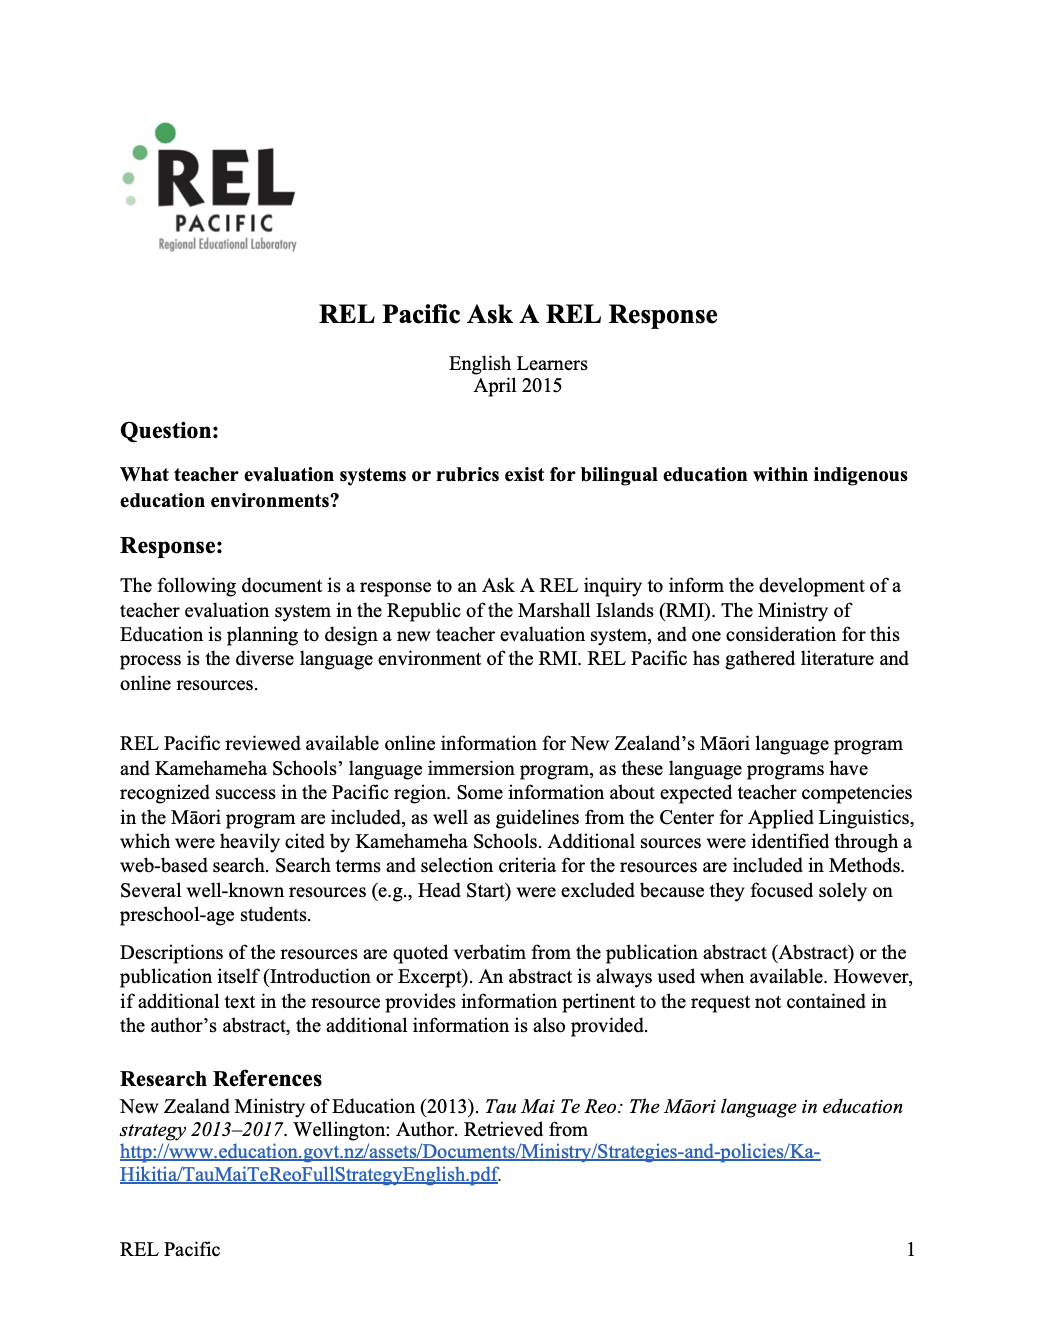 REL Pacific Ask A REL Response_English Learners